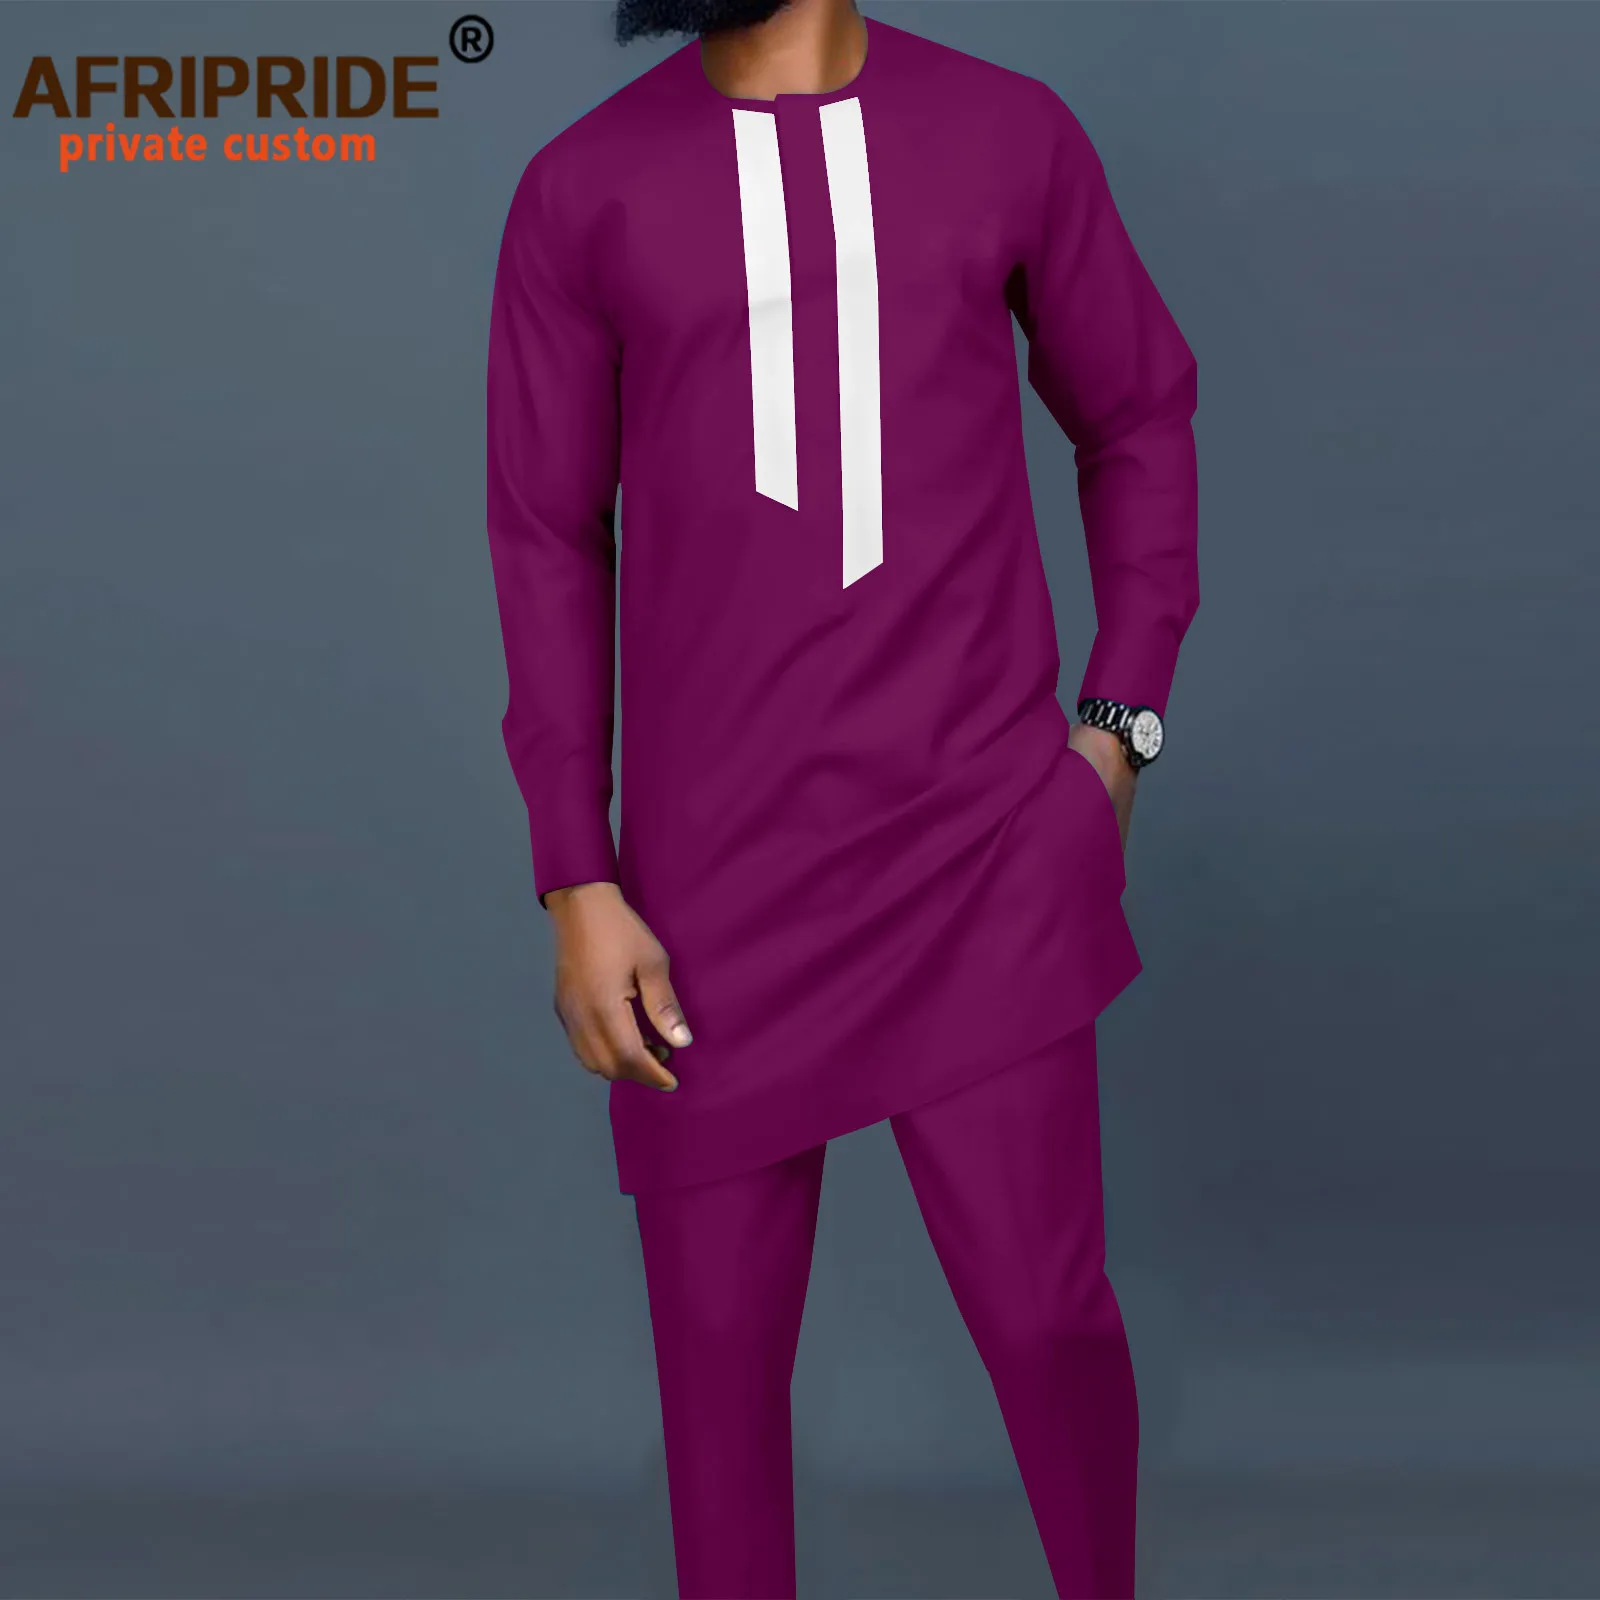 2022 African Men Traditional Clothing Set Dashiki Outfit Ankara Long Sleeve Shirt+Pants African Suit Tribal Tracksuit A2216096